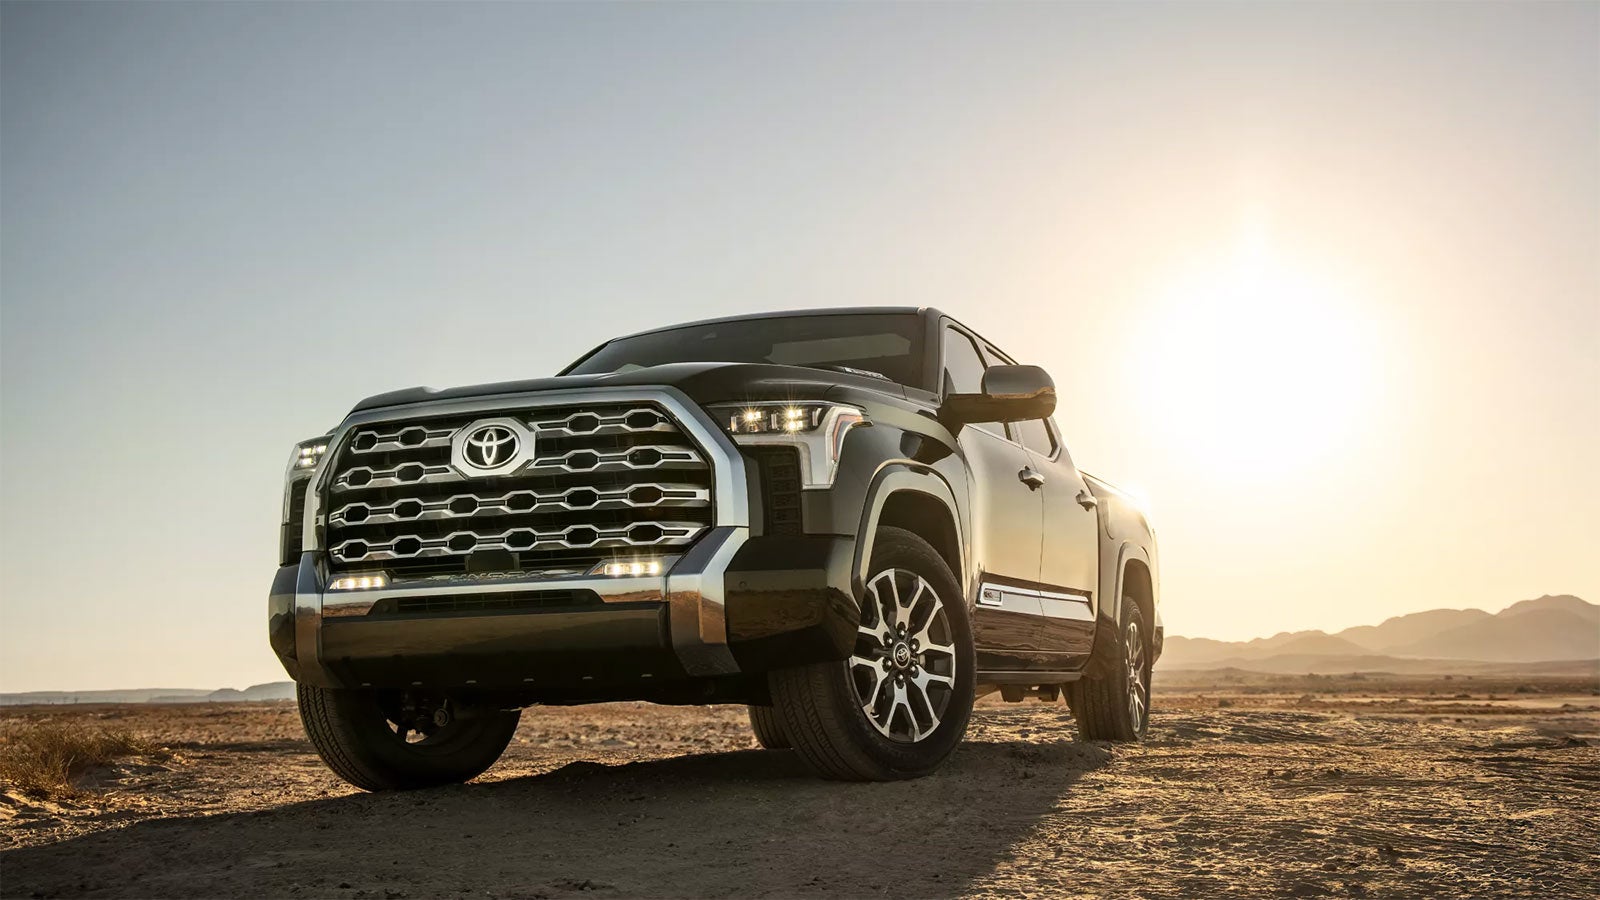 2022 Toyota Tundra Gallery | Passport Toyota in Suitland MD